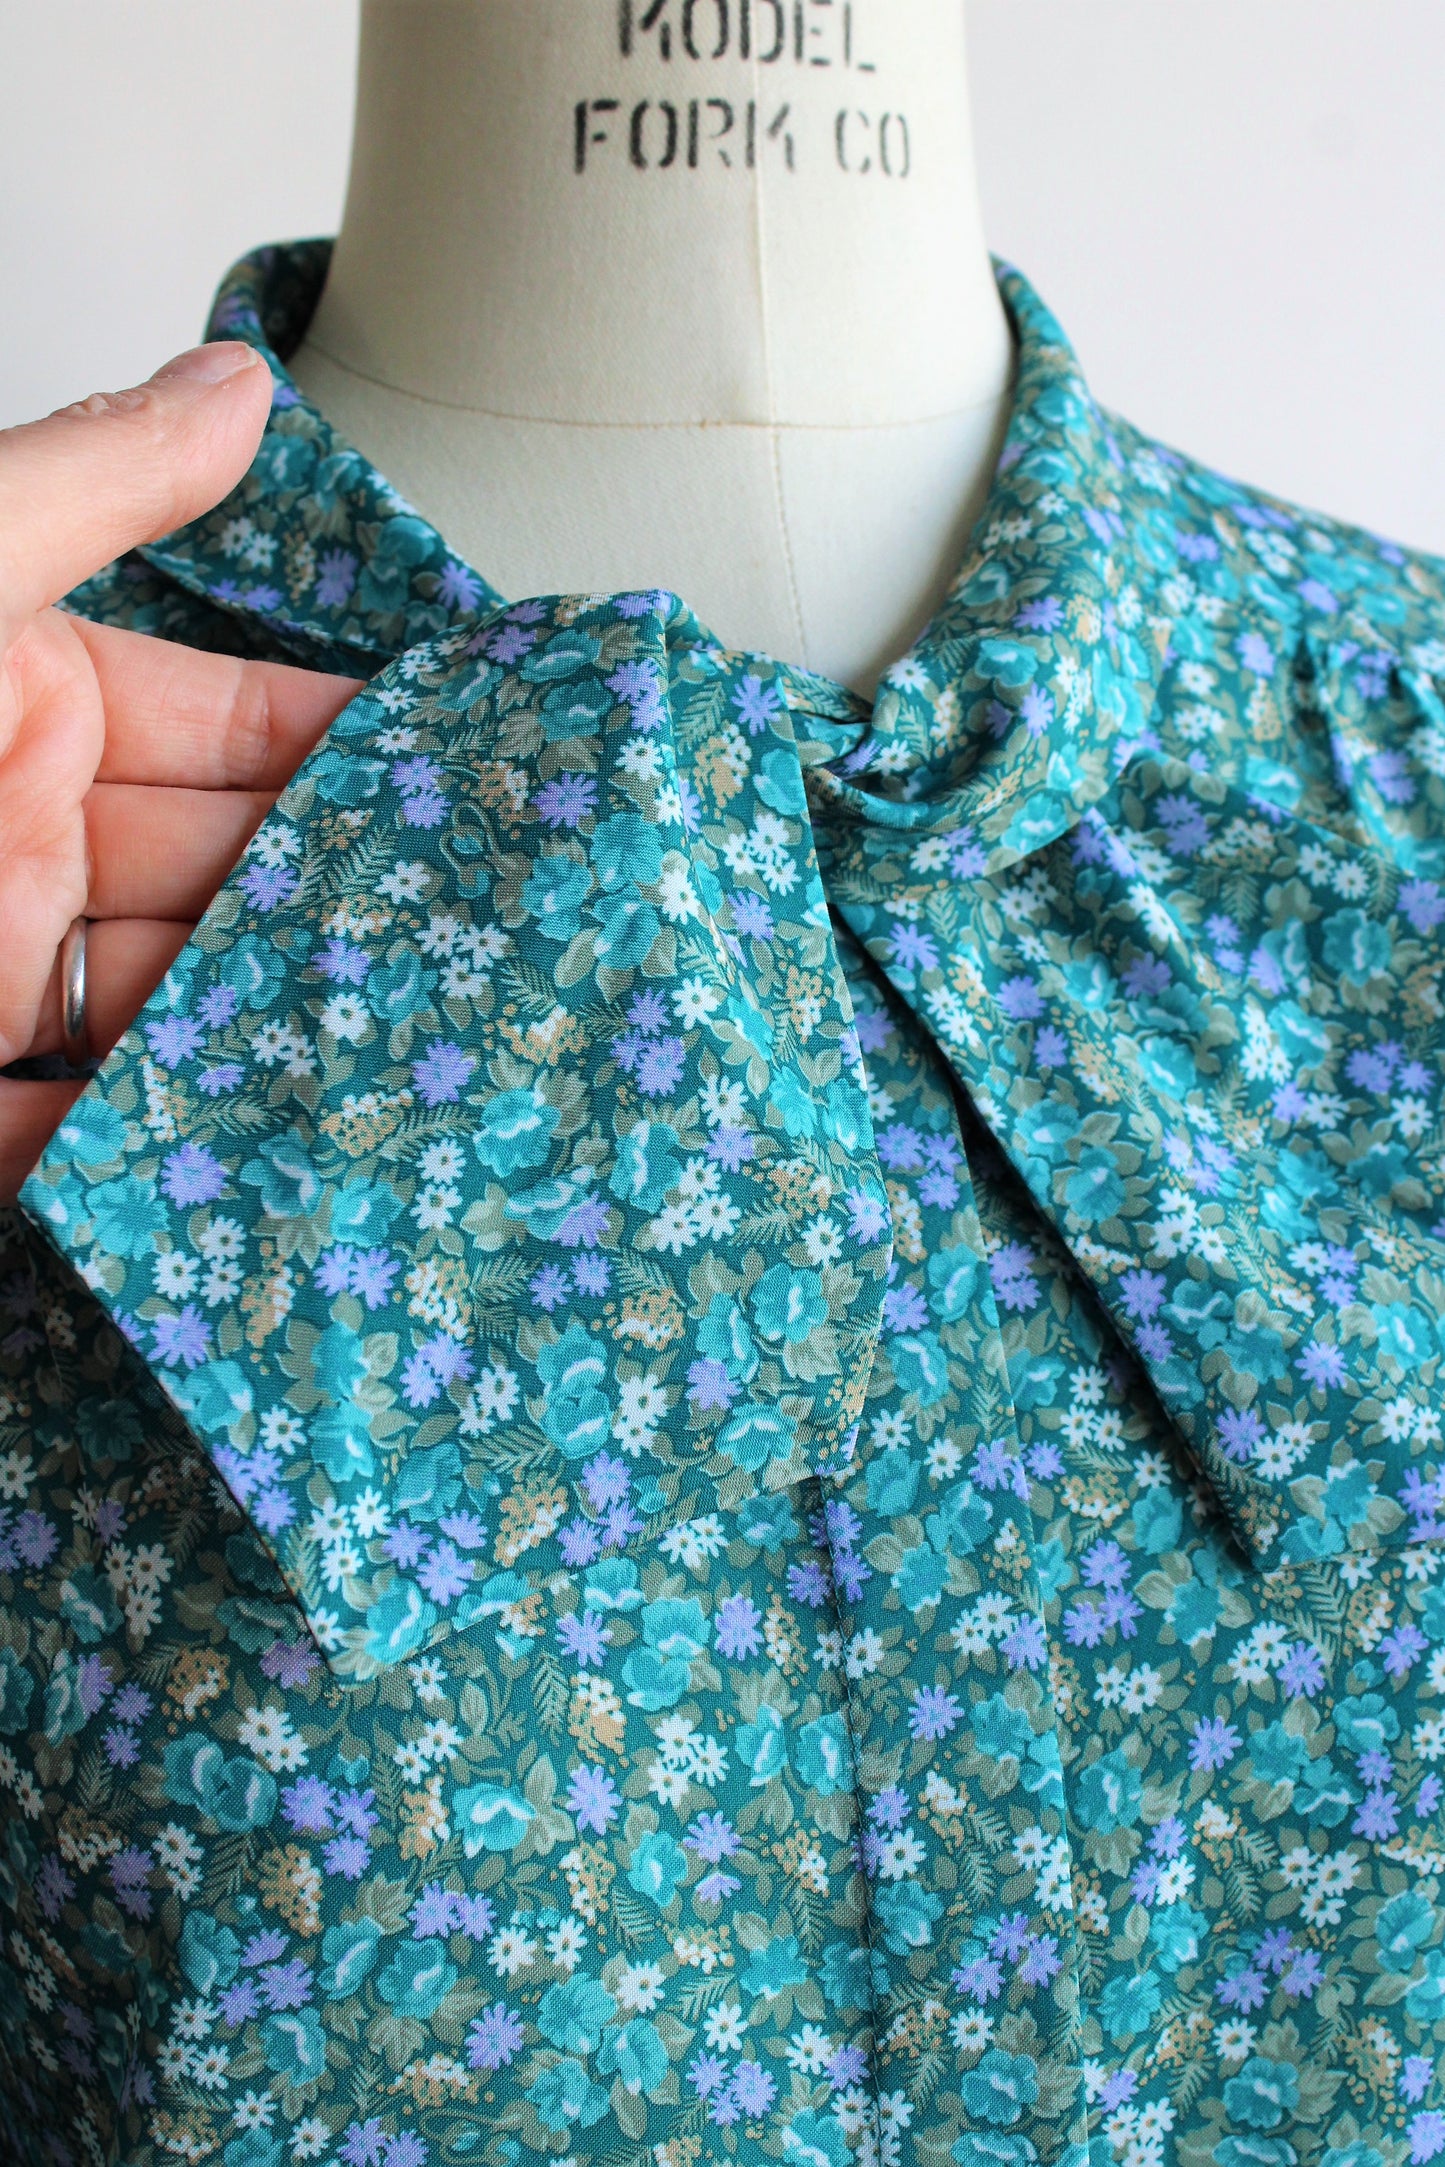 Vintage 1980s Floral Print Blouse with Bow